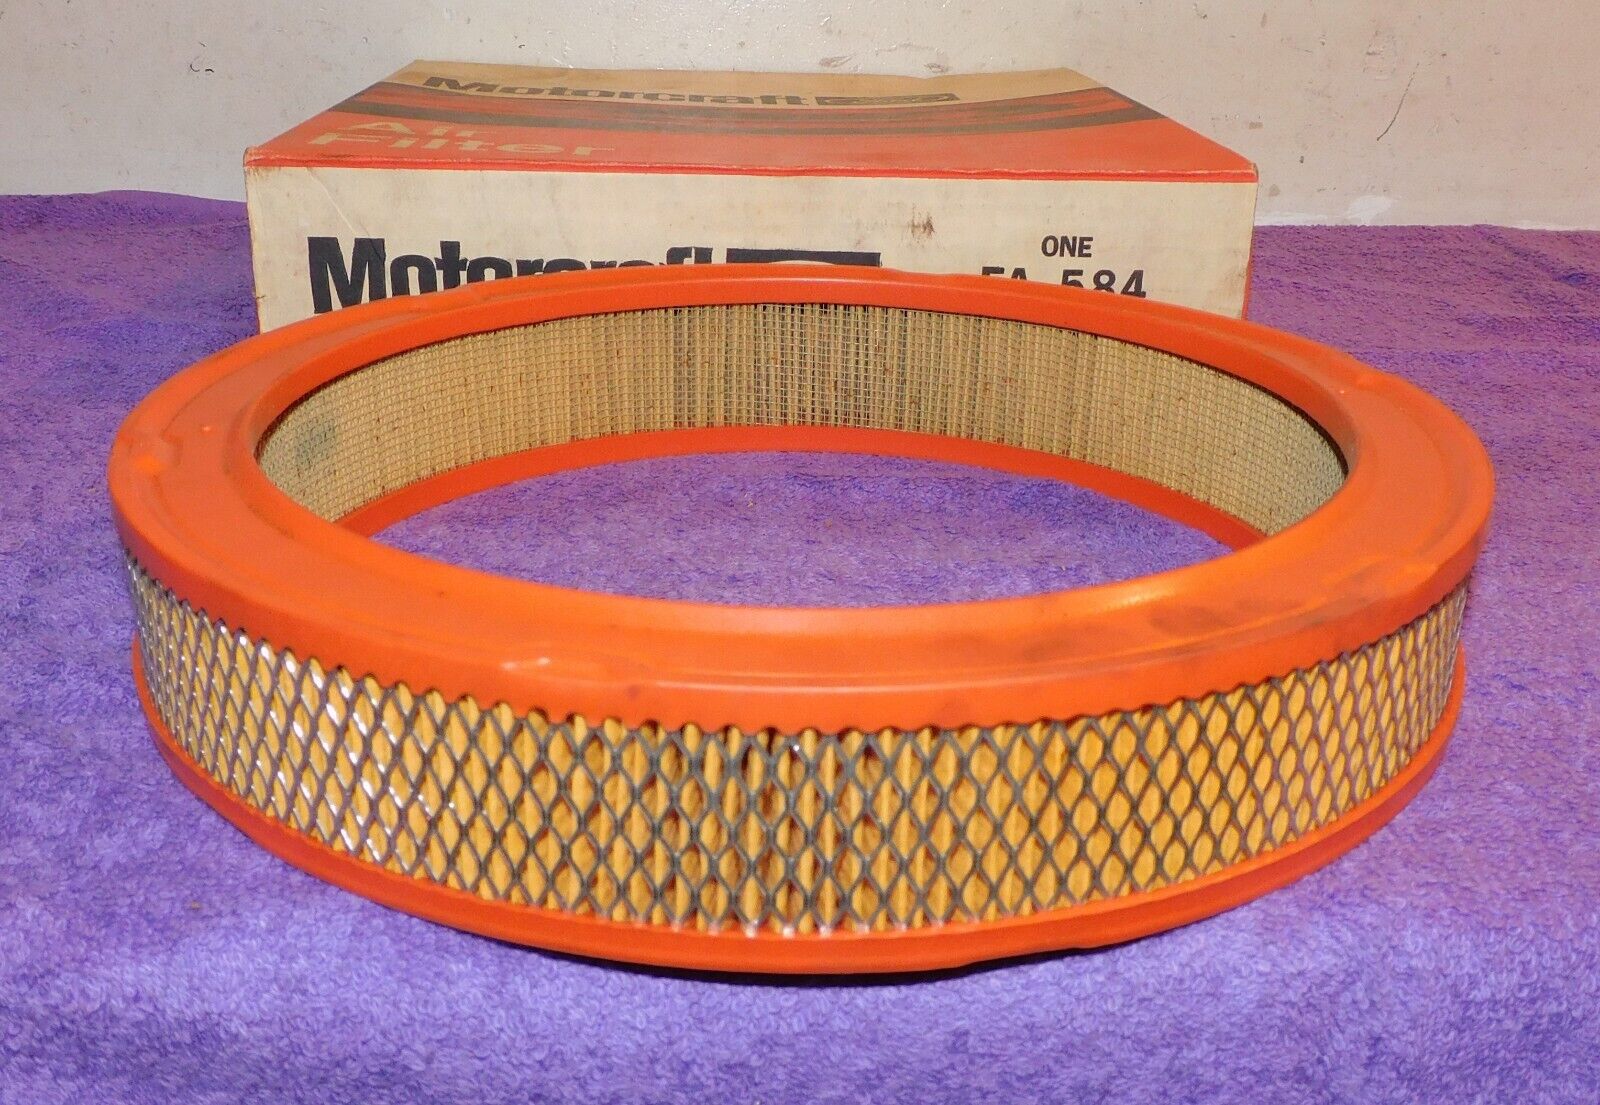 1973-1976 Ford Mustang Torino NOS 2.8 Liter 250 6-CYL AIR CLEANER FILTER ELEMENT